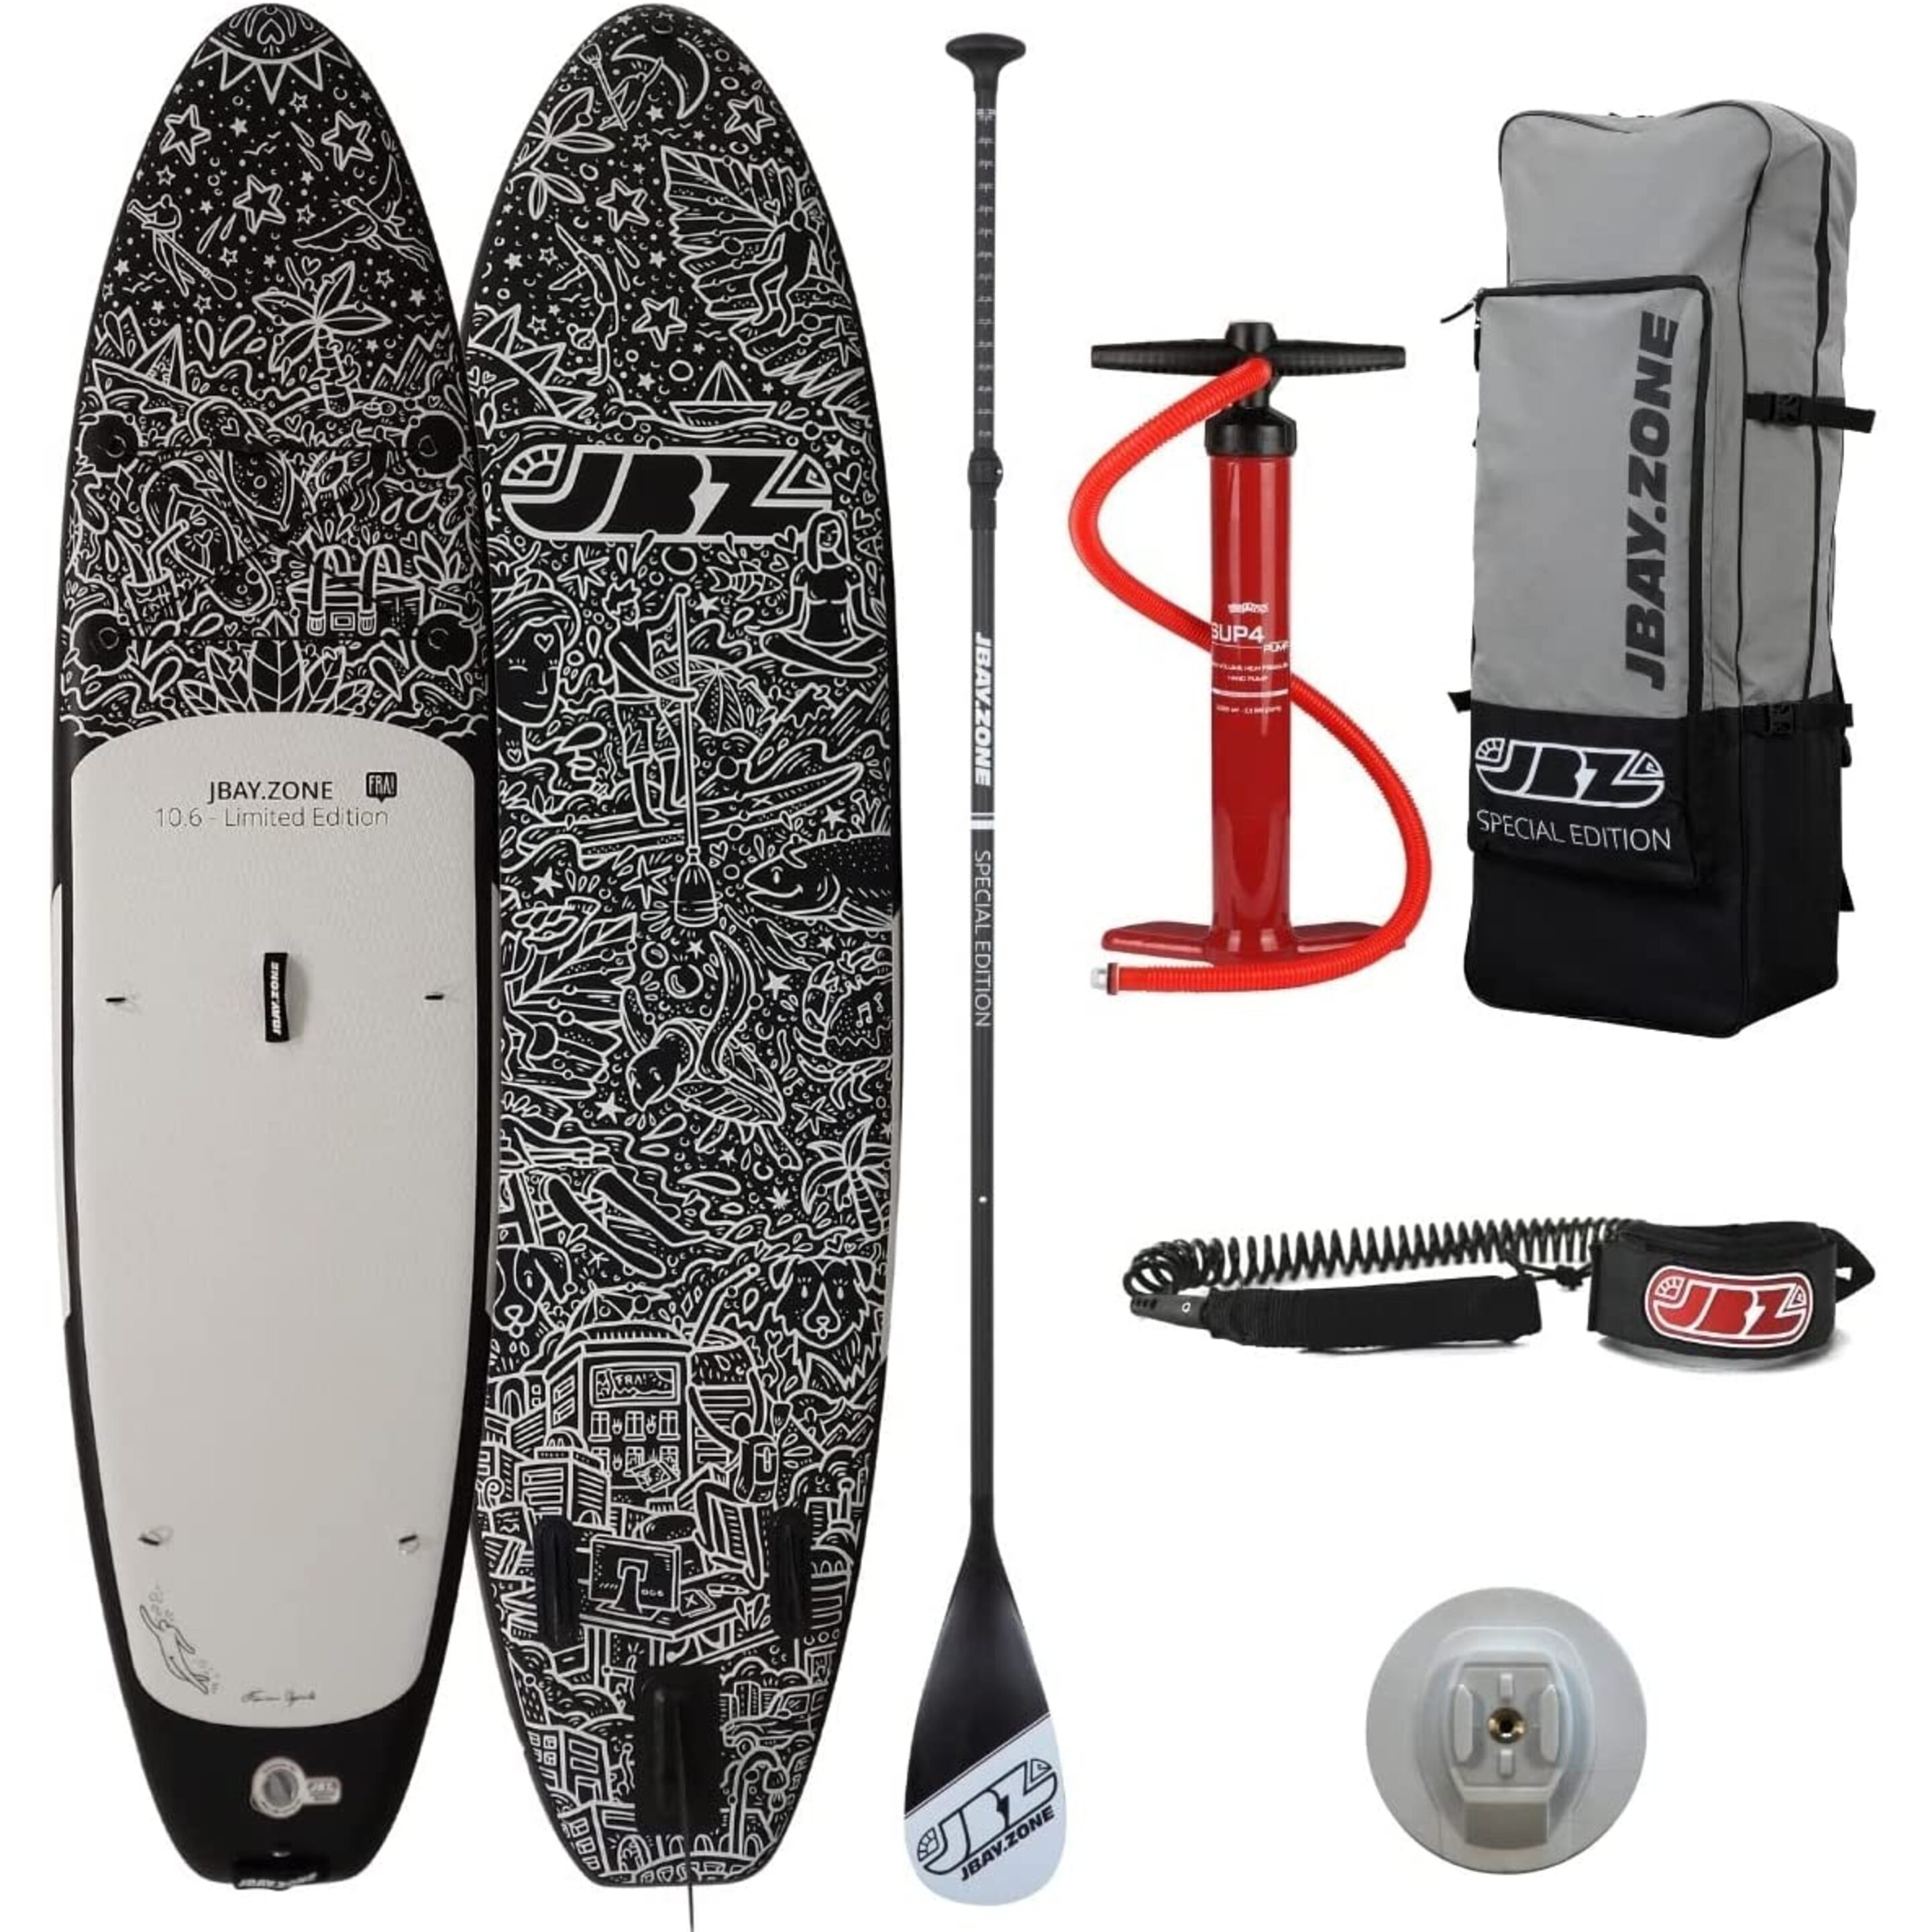 Tabla De Stand Up Paddle Surf Sup Hinchable Jbay.zone Fra! Special Edition - Negro/Blanco  MKP